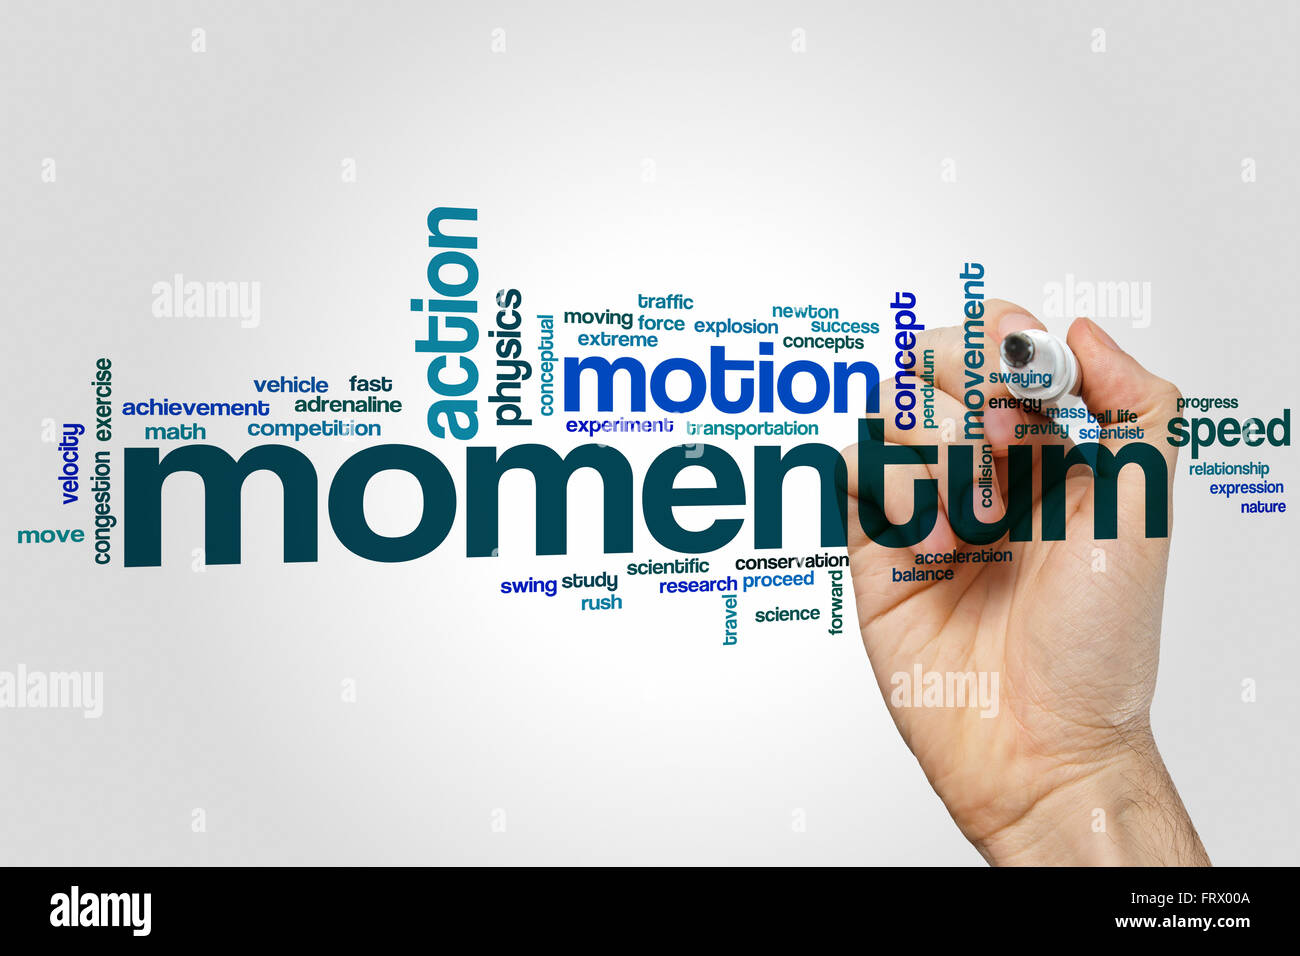 Momentum concept word cloud background Stock Photo - Alamy